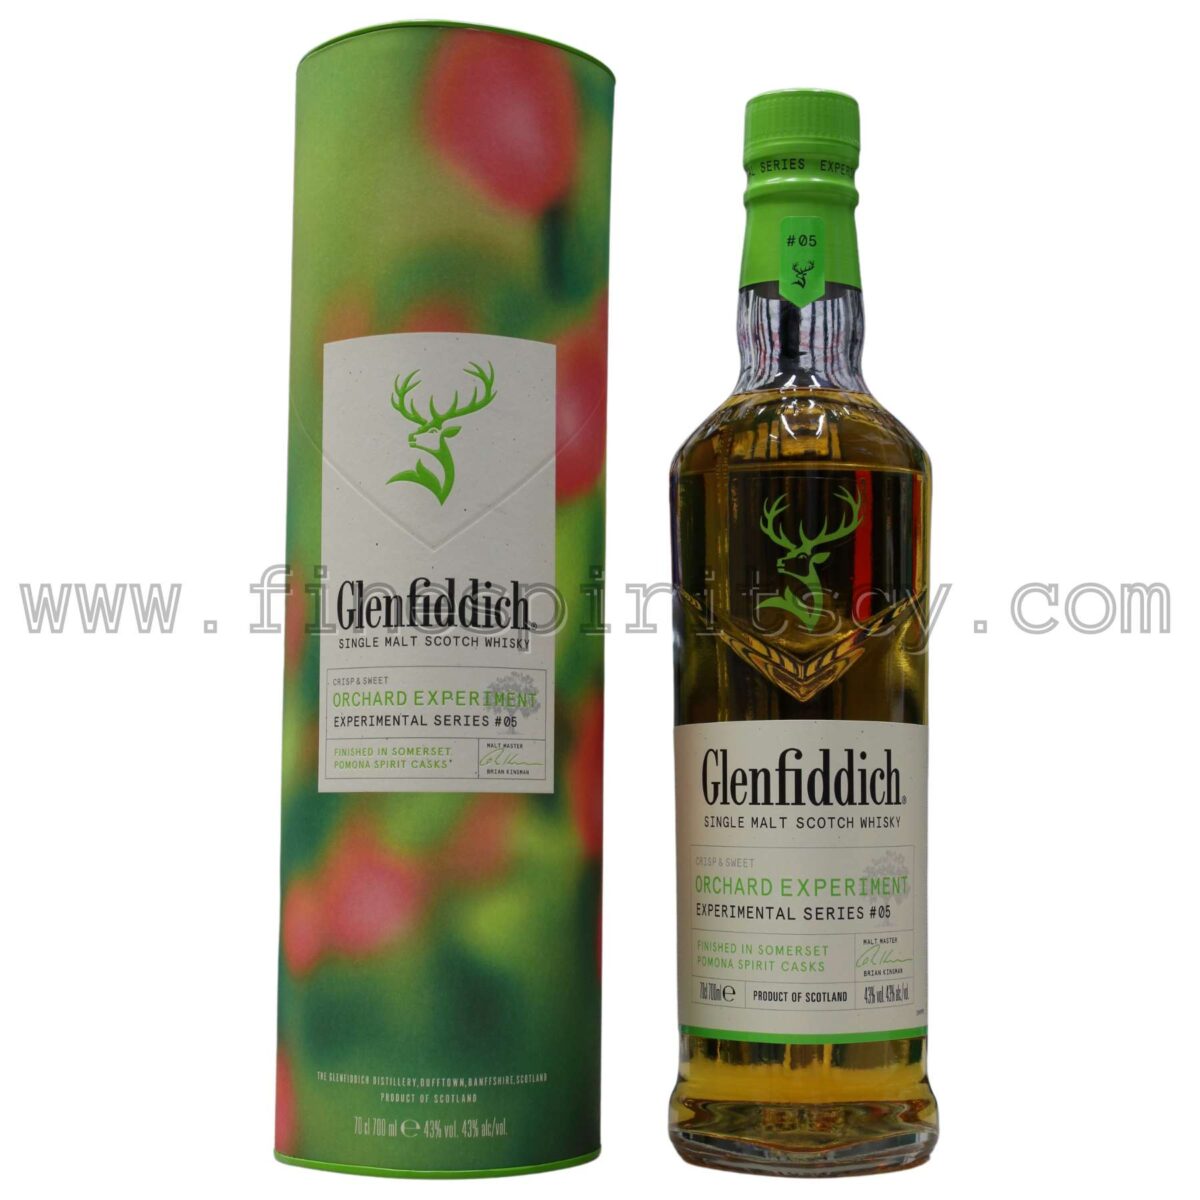 Glenfiddich Orchard Experiment Xperimental Series Cyprus Front Tube Bottle